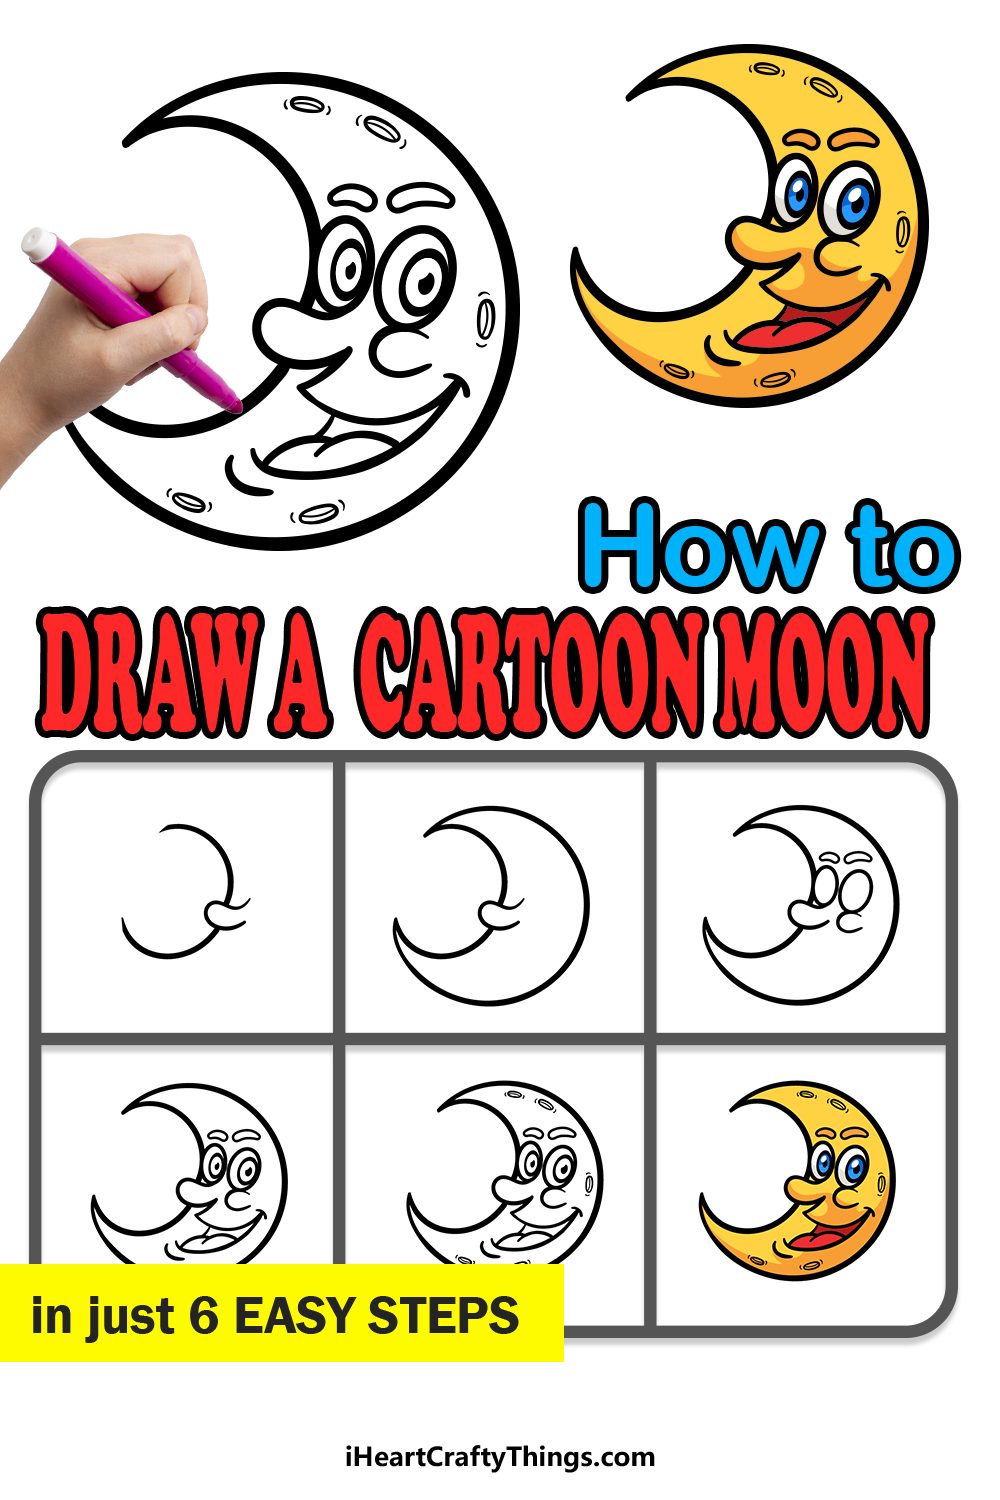 how to draw a cartoon moon in 6 easy steps